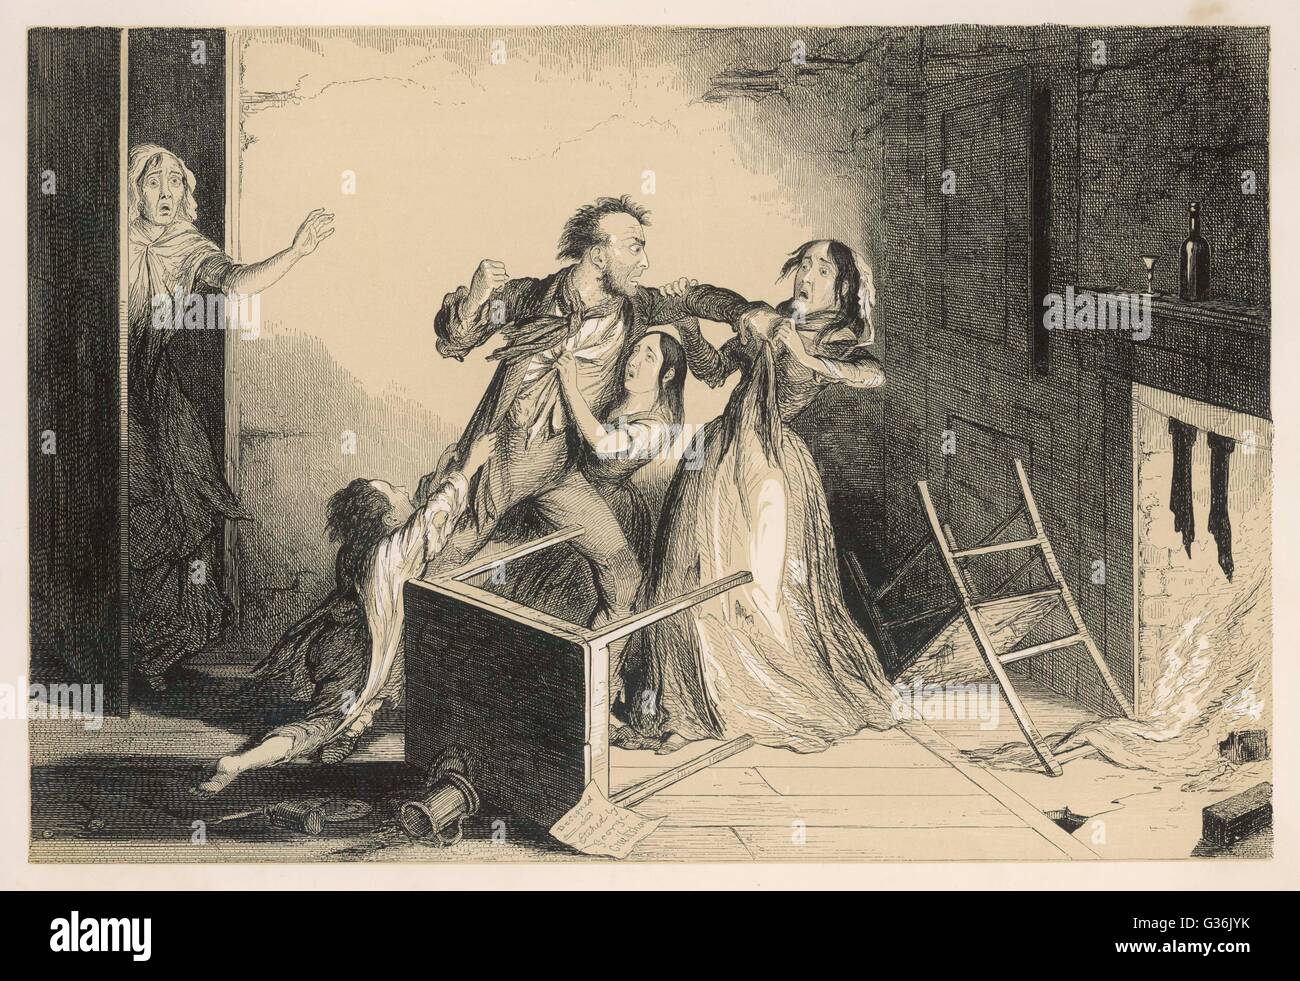 The Bottle, scene 6    Husband and wife come to blows over The Bottle       Date: 1847 Stock Photo